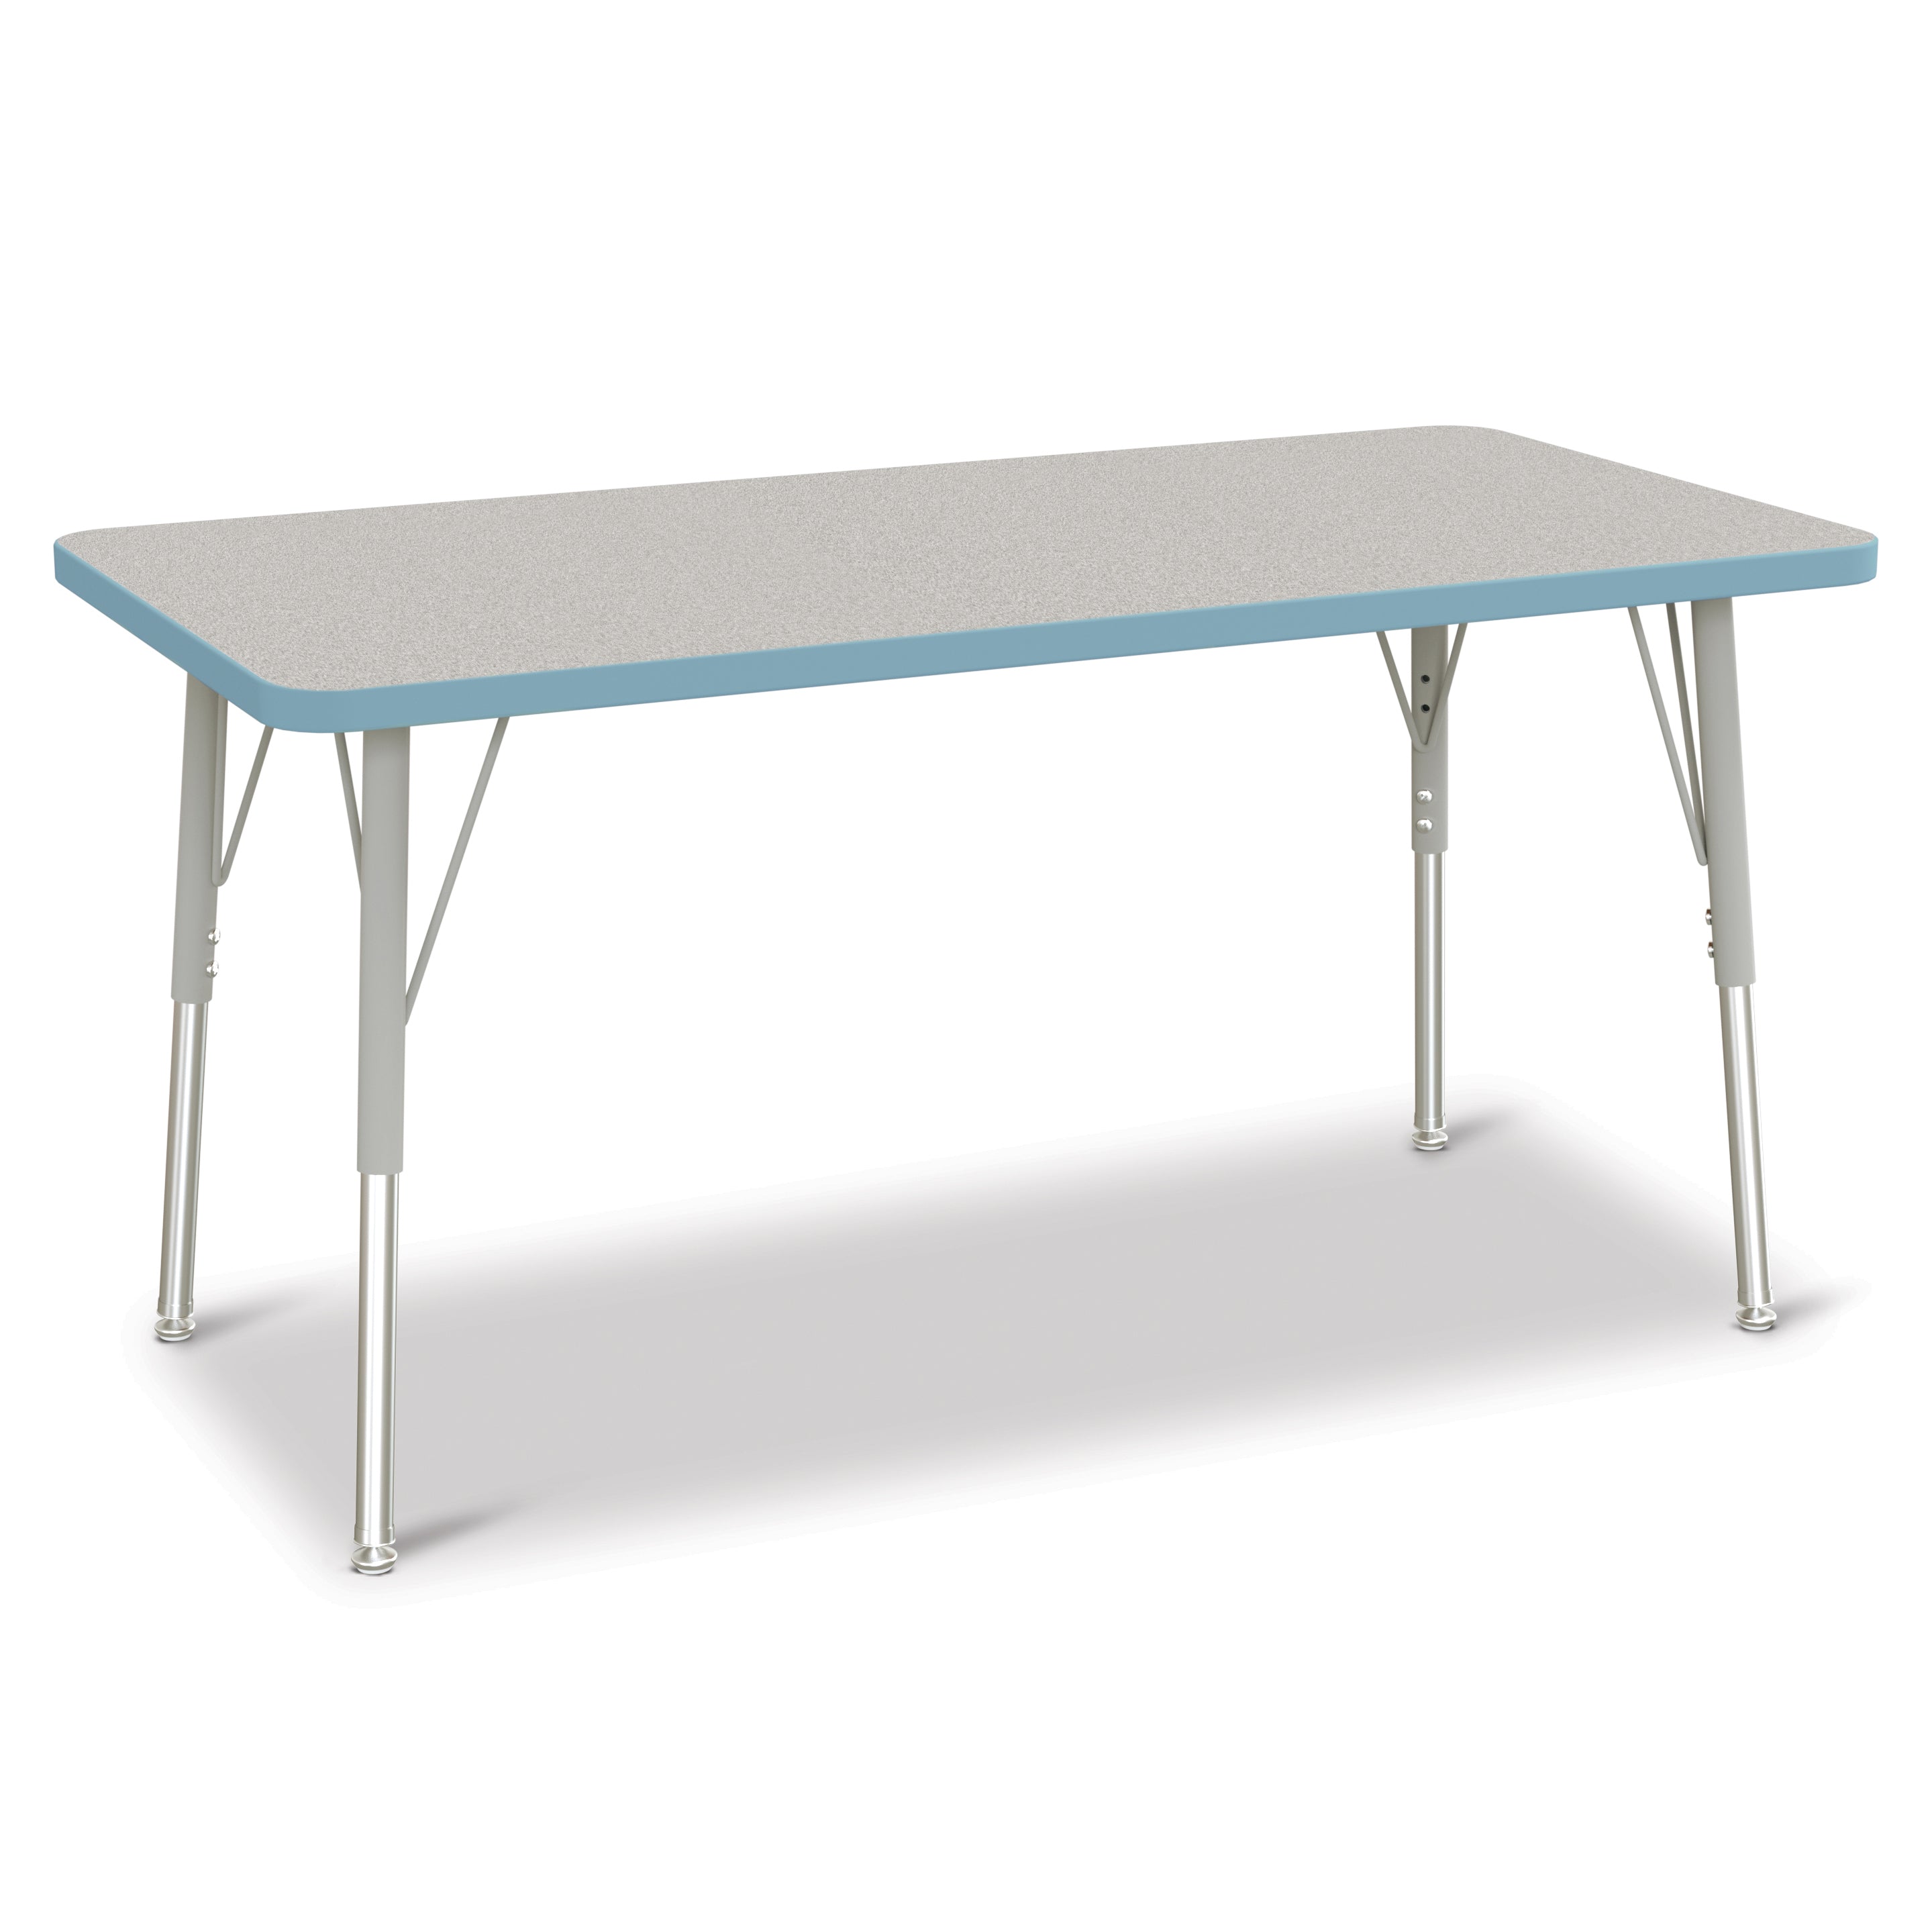 6403JCA130, Berries Rectangle Activity Table - 24" X 48", A-height - Freckled Gray/Key Lime/Gray